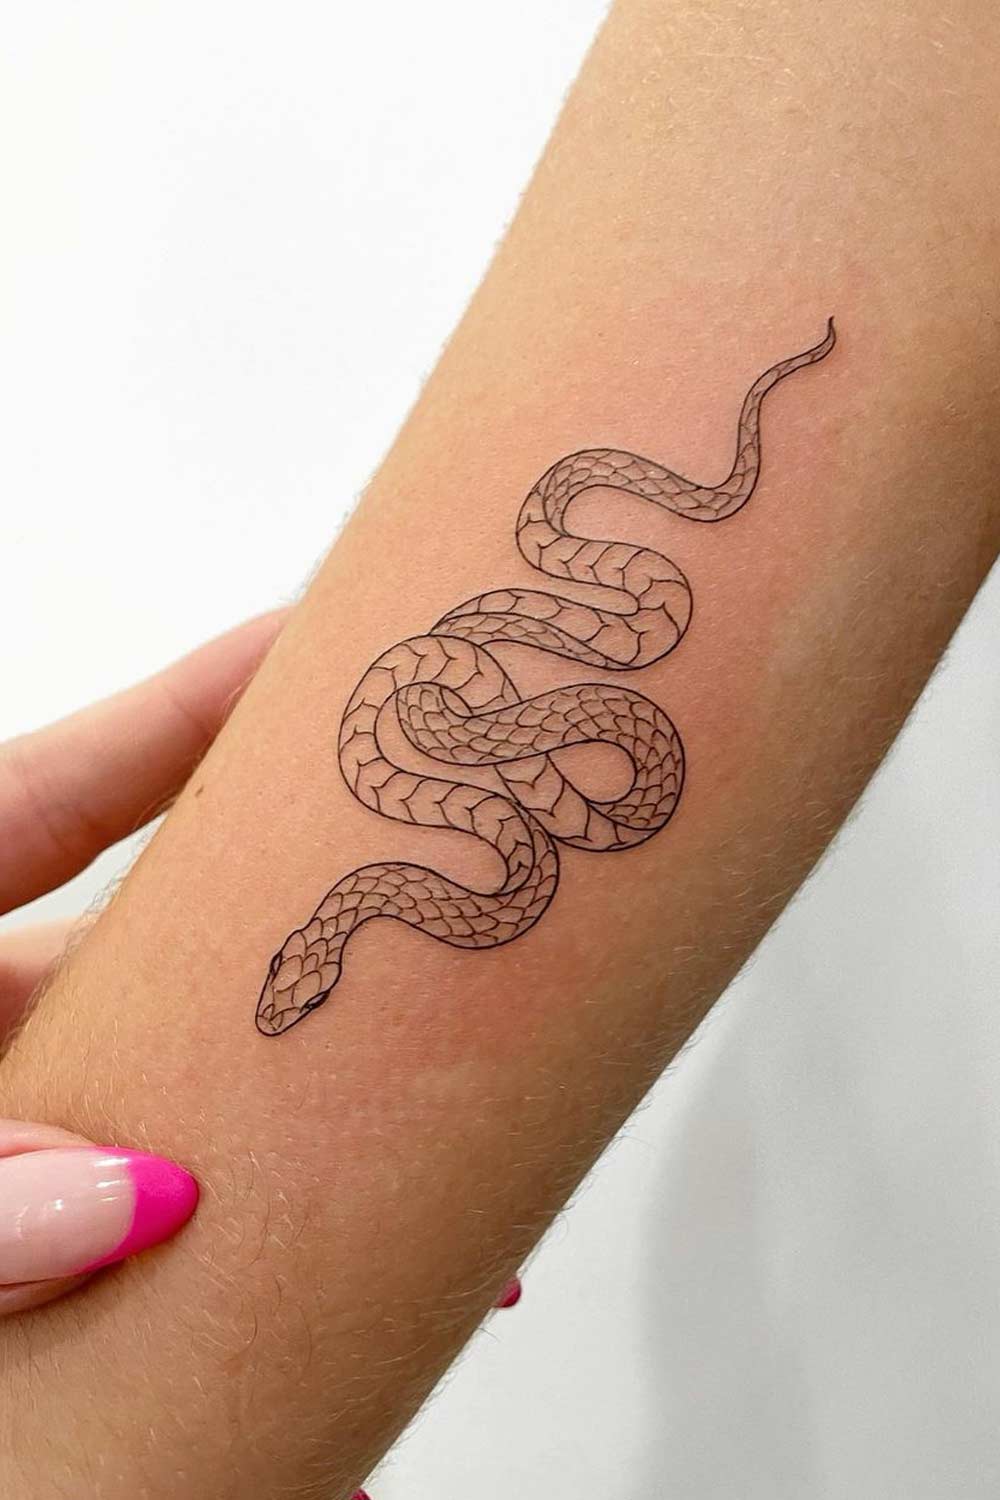 Little snake hand tattoo that I recently did! | Gallery posted by  heidikayetattoo | Lemon8